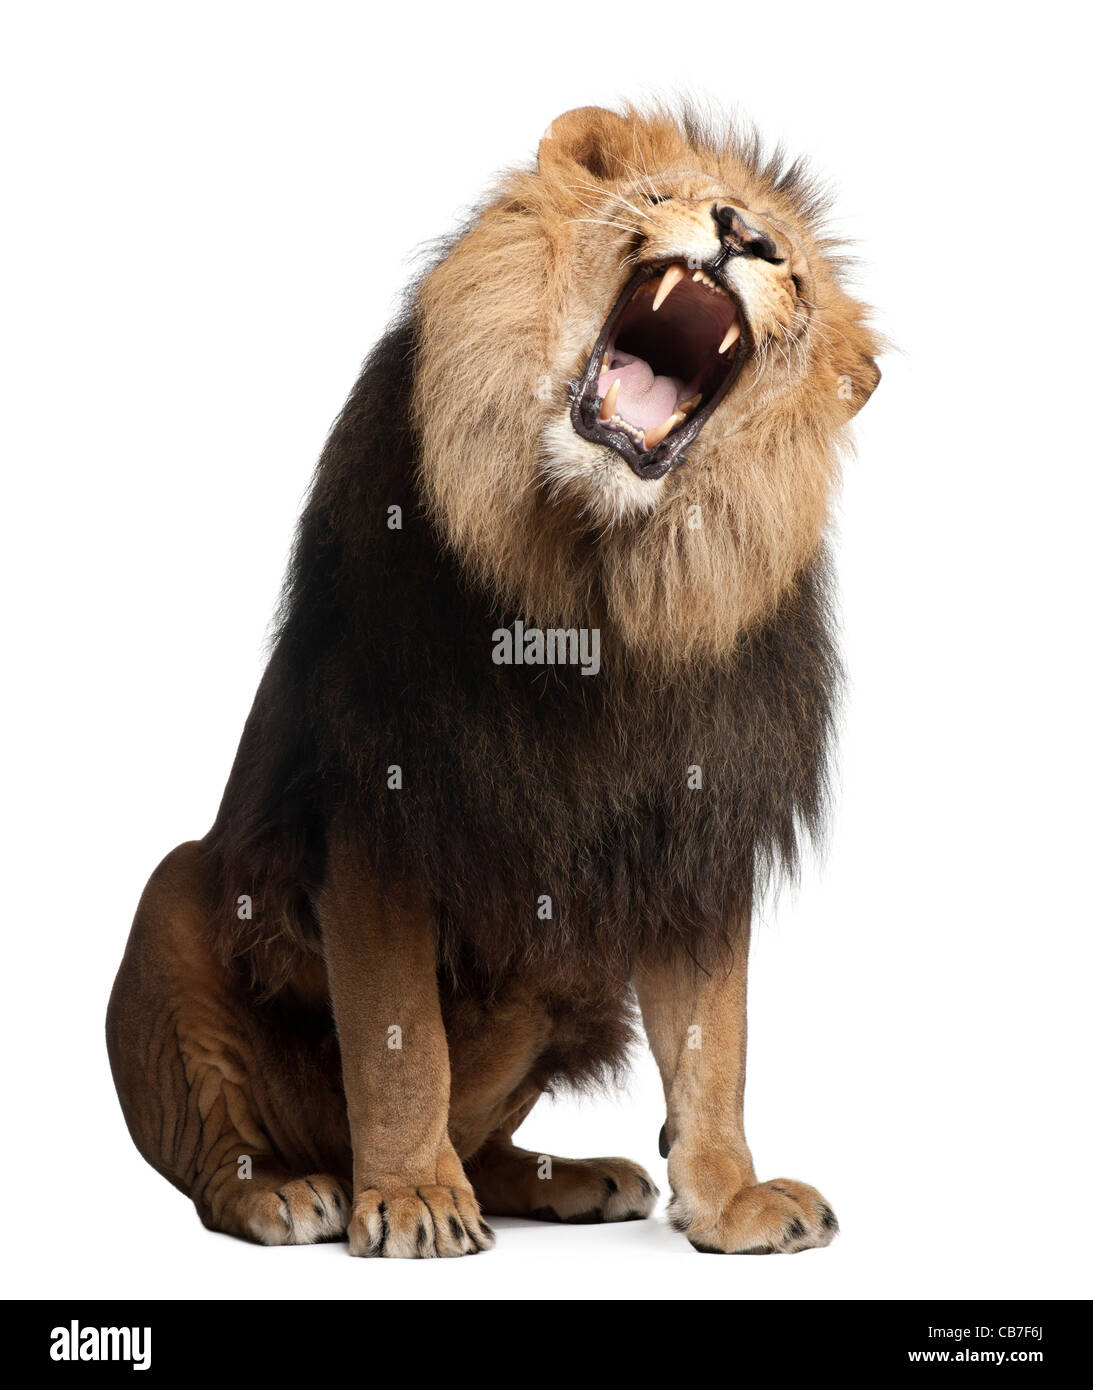 Lion, 8 years old, Panthera leo, roaring in front of a white background Stock Photo